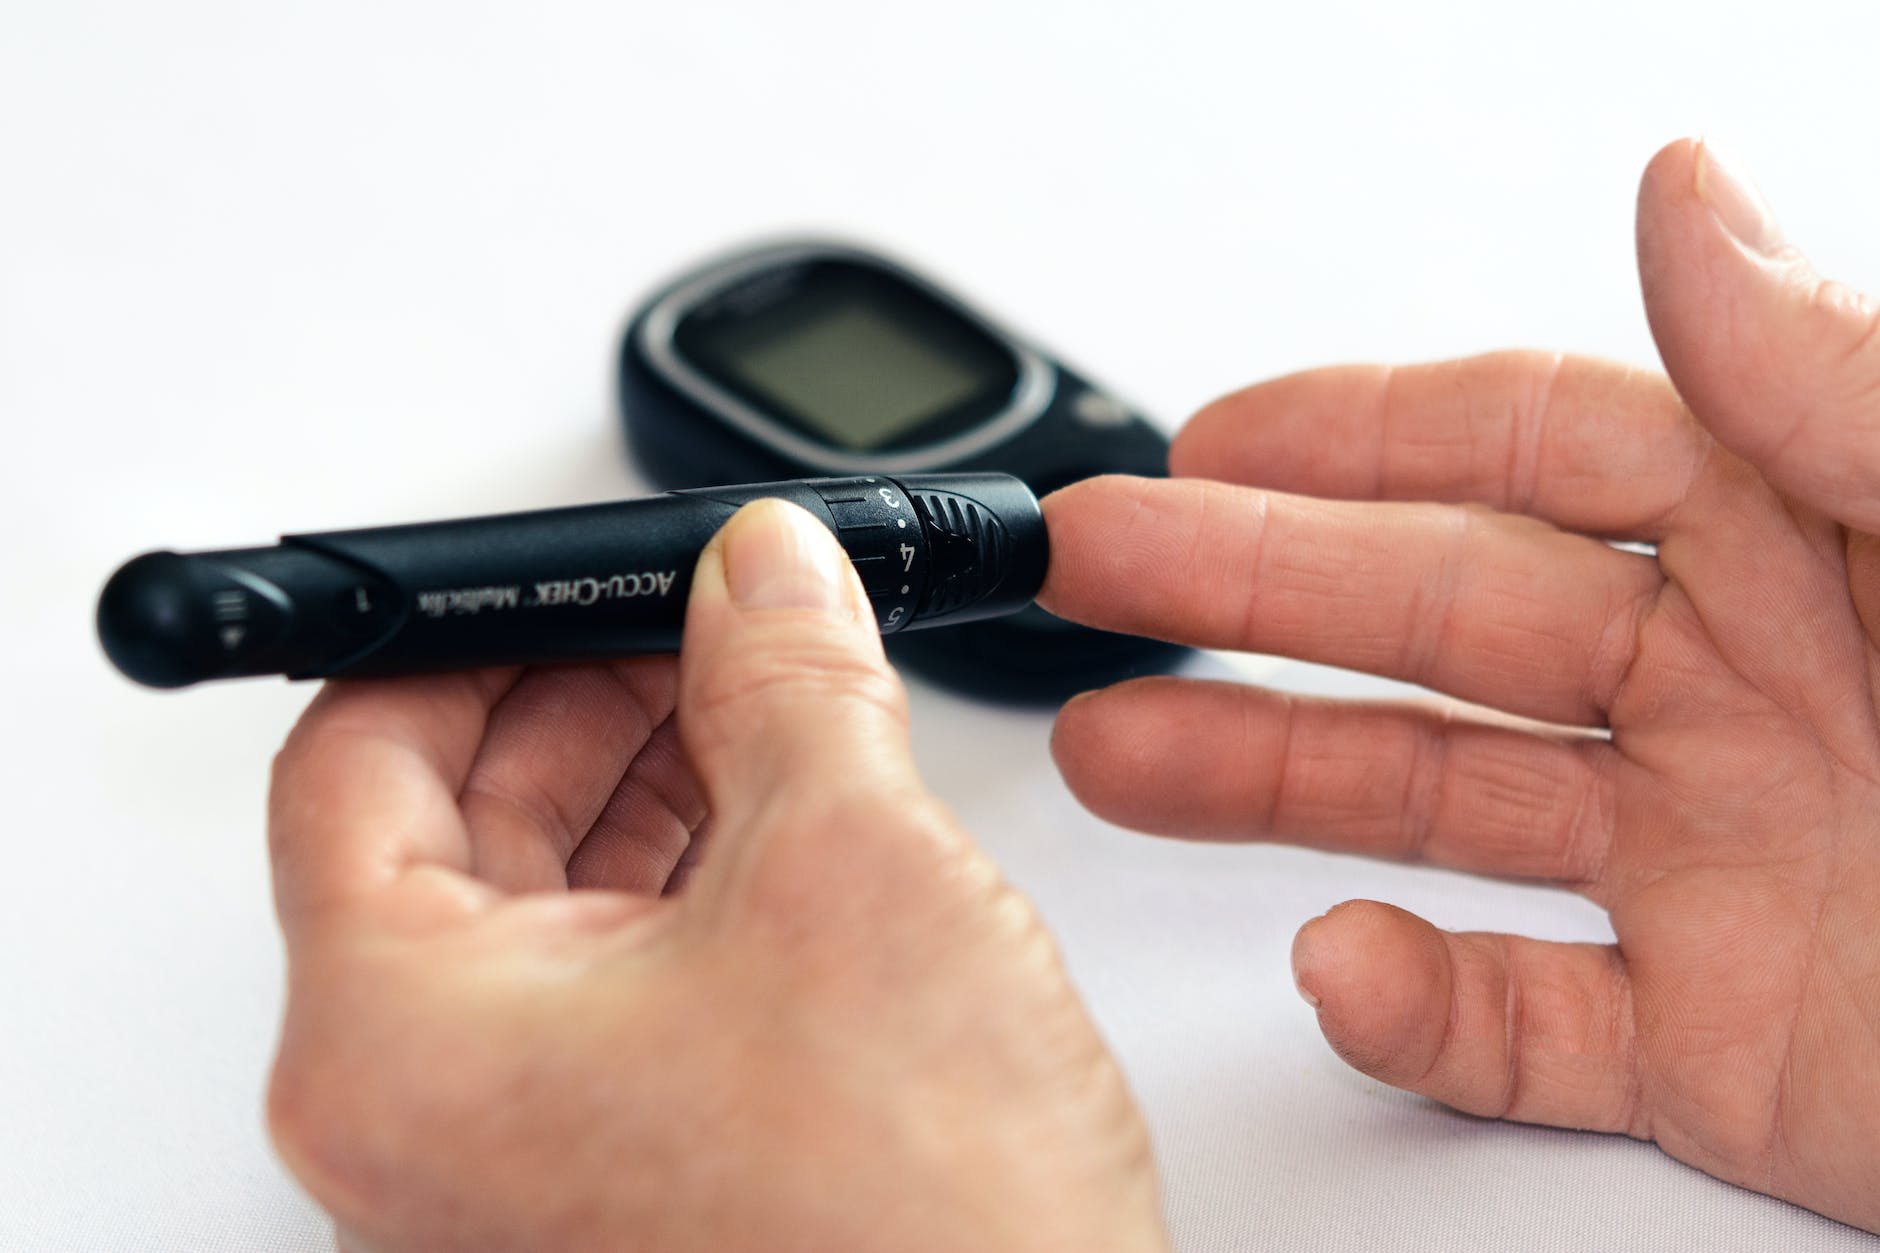 How to Use Diabetic Test Strips to Monitor Your Blood Sugar Levels